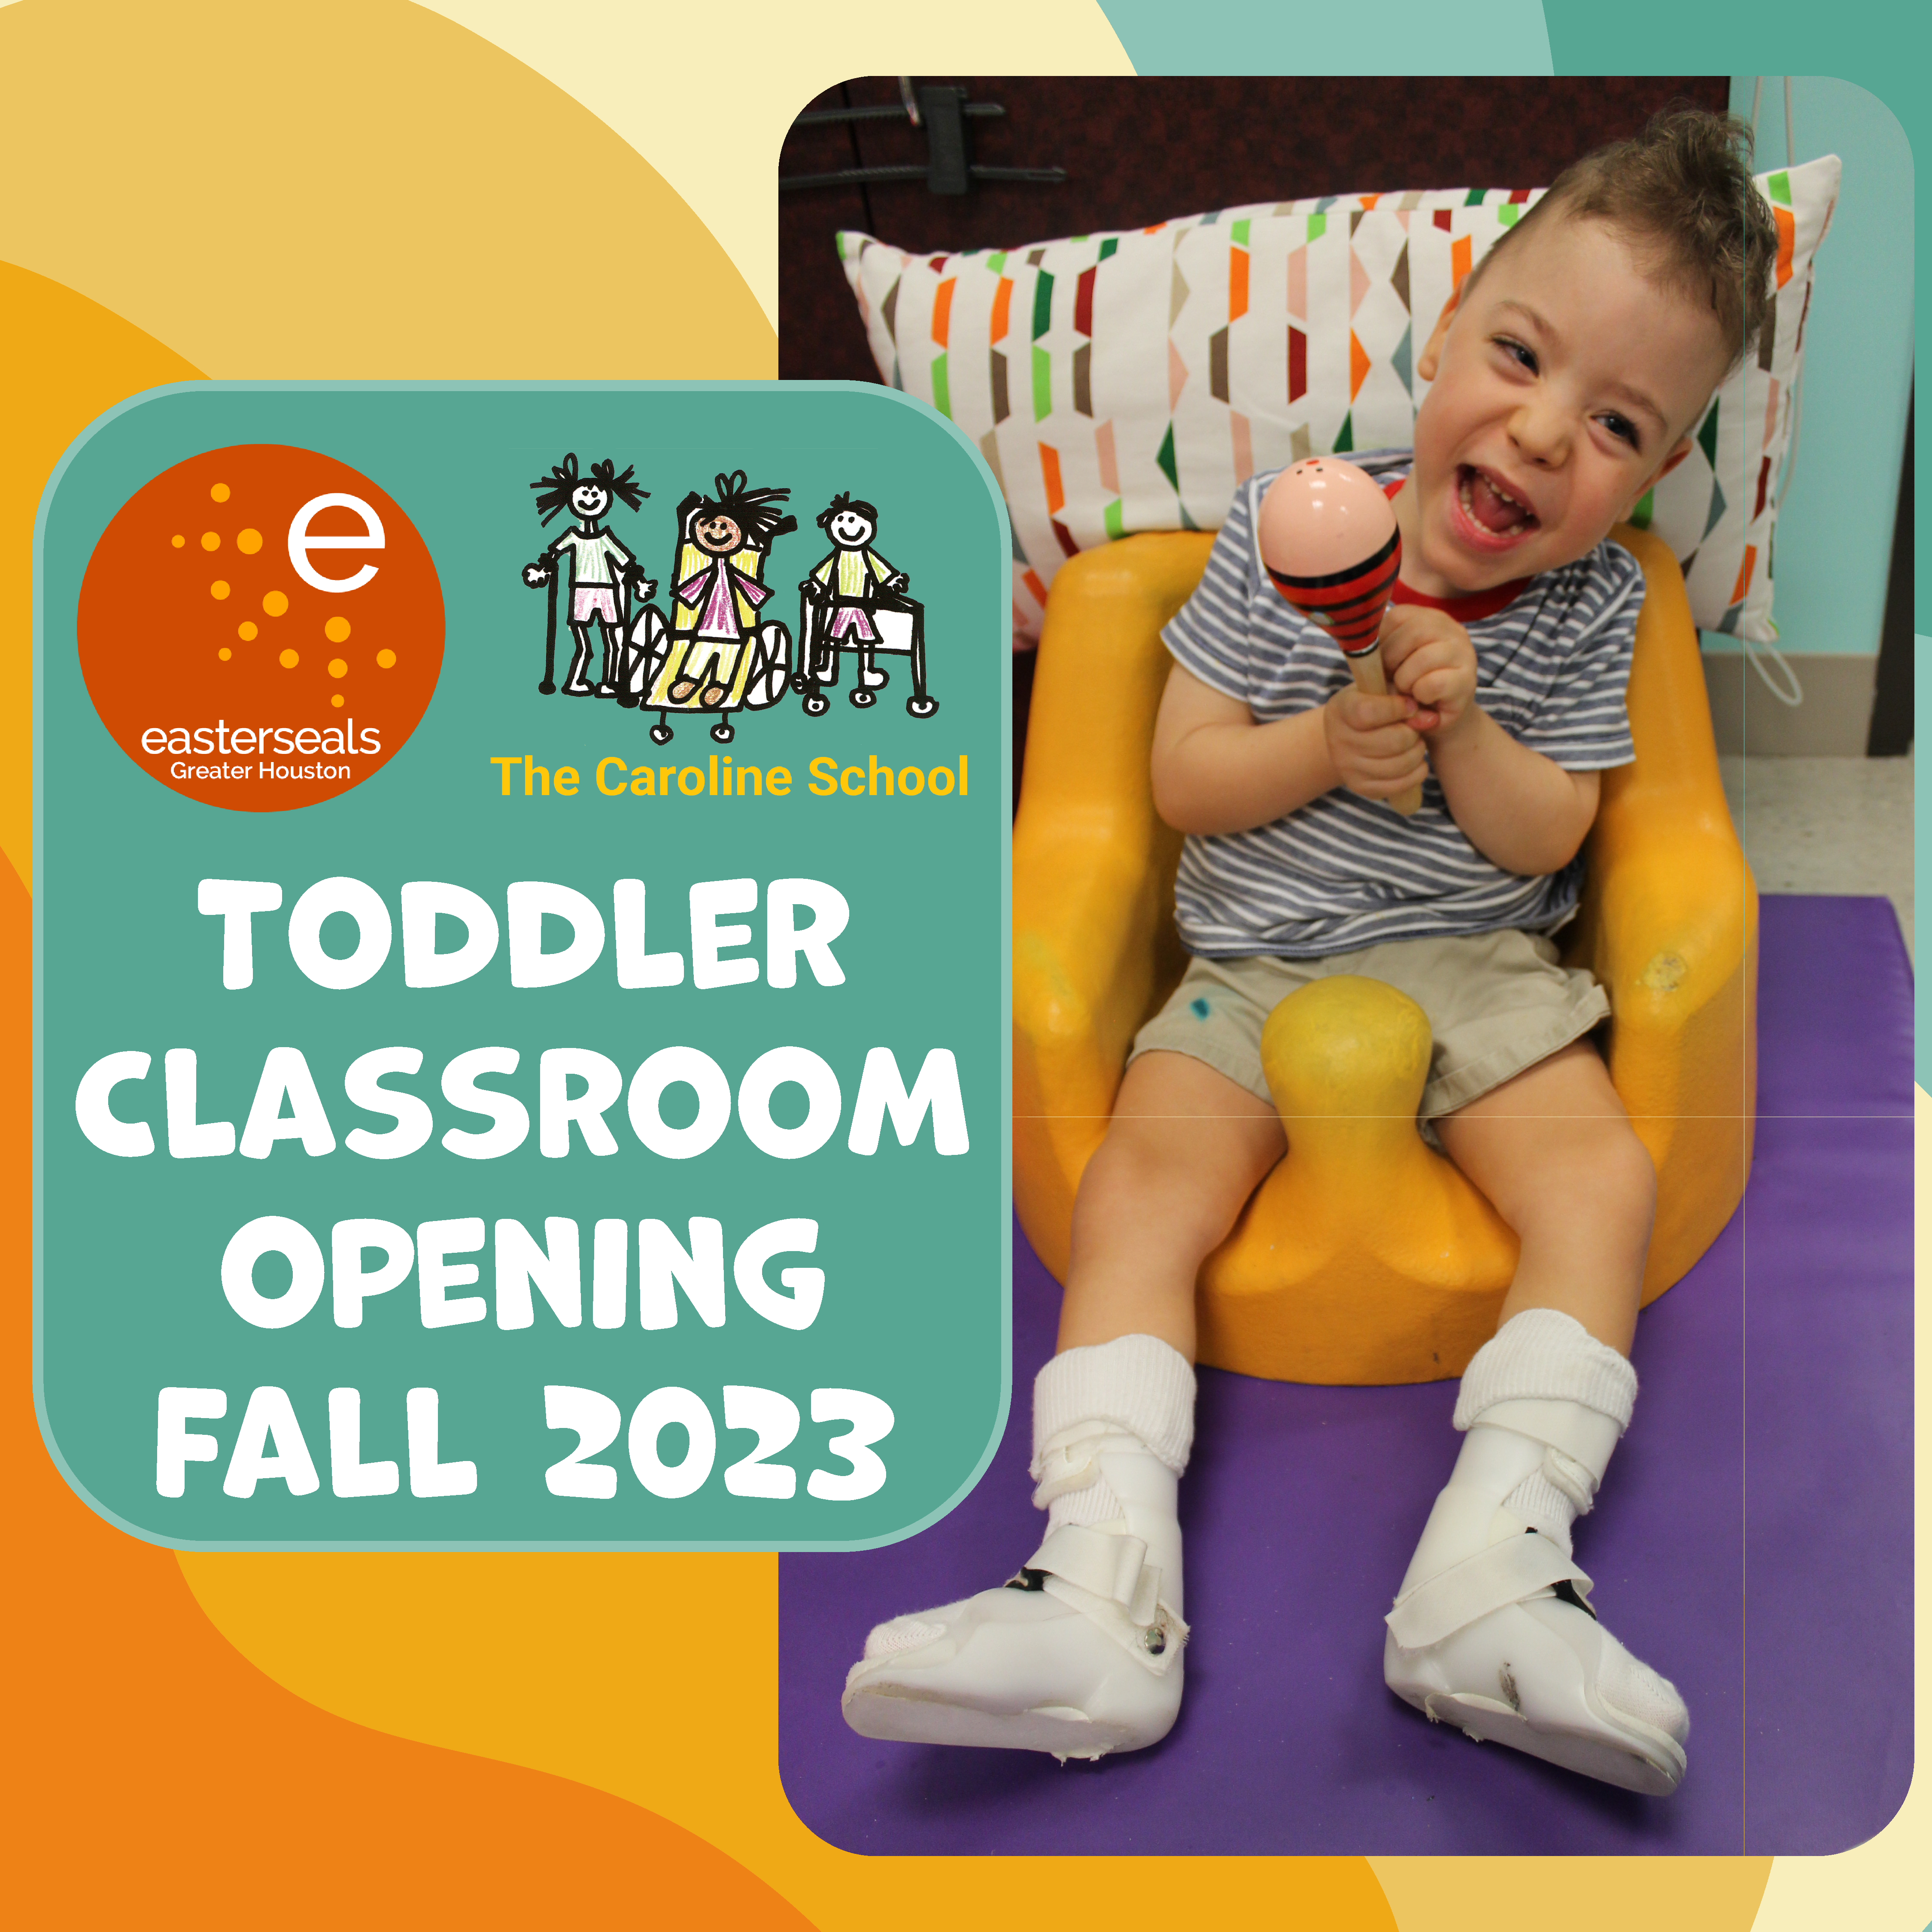 Toddler Classroom Opening Fall 2023